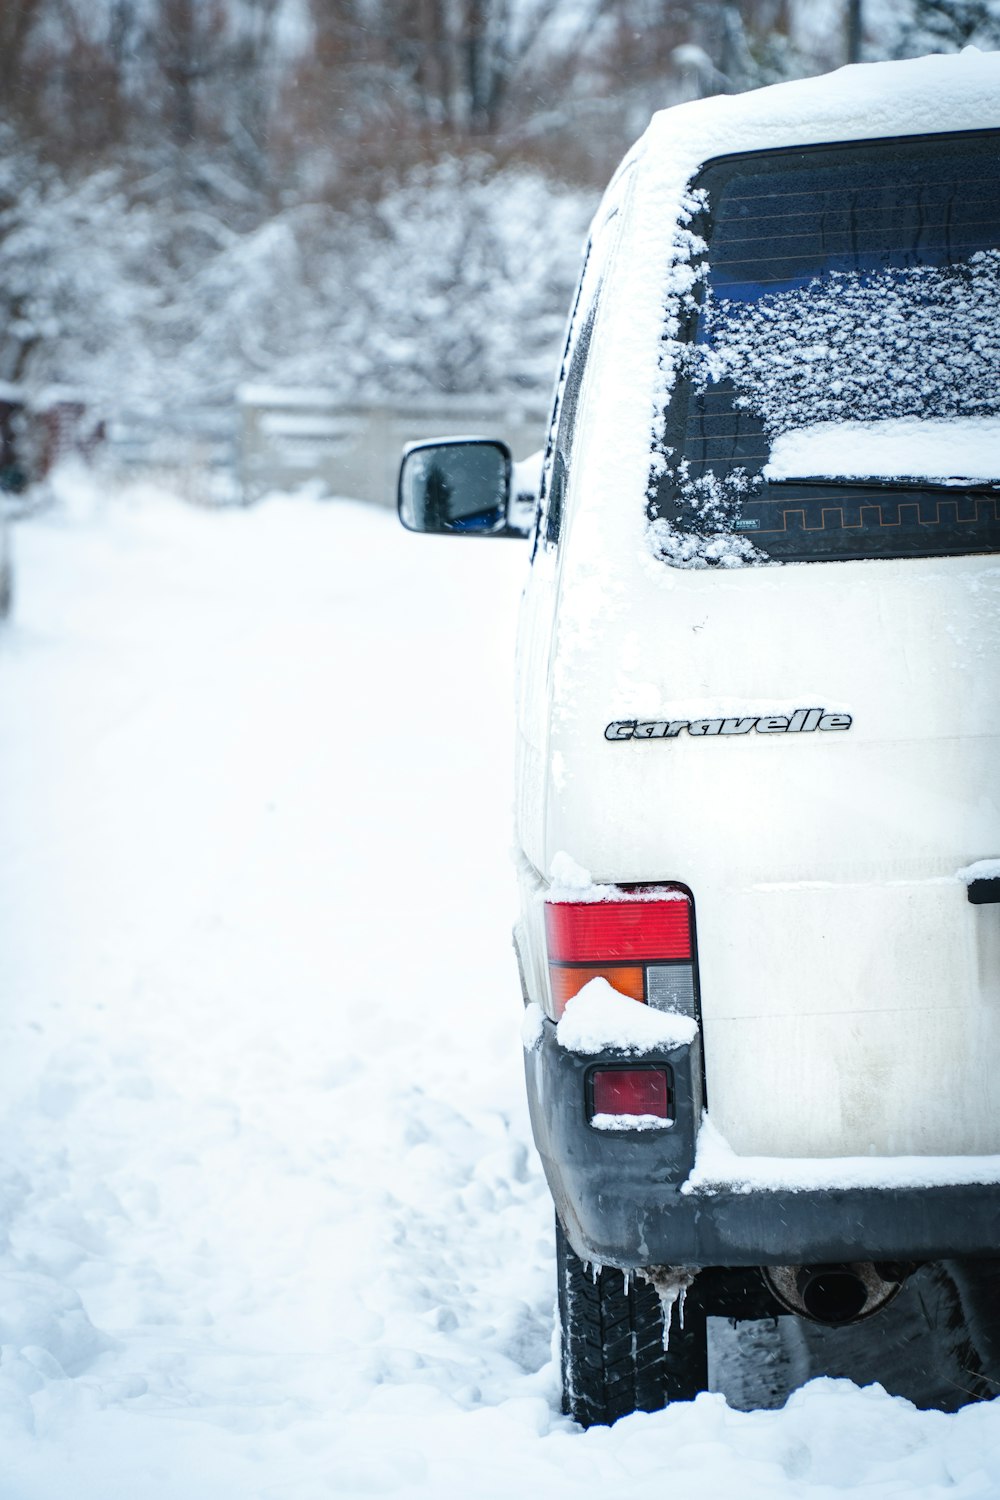 a white van parked on a snowy street